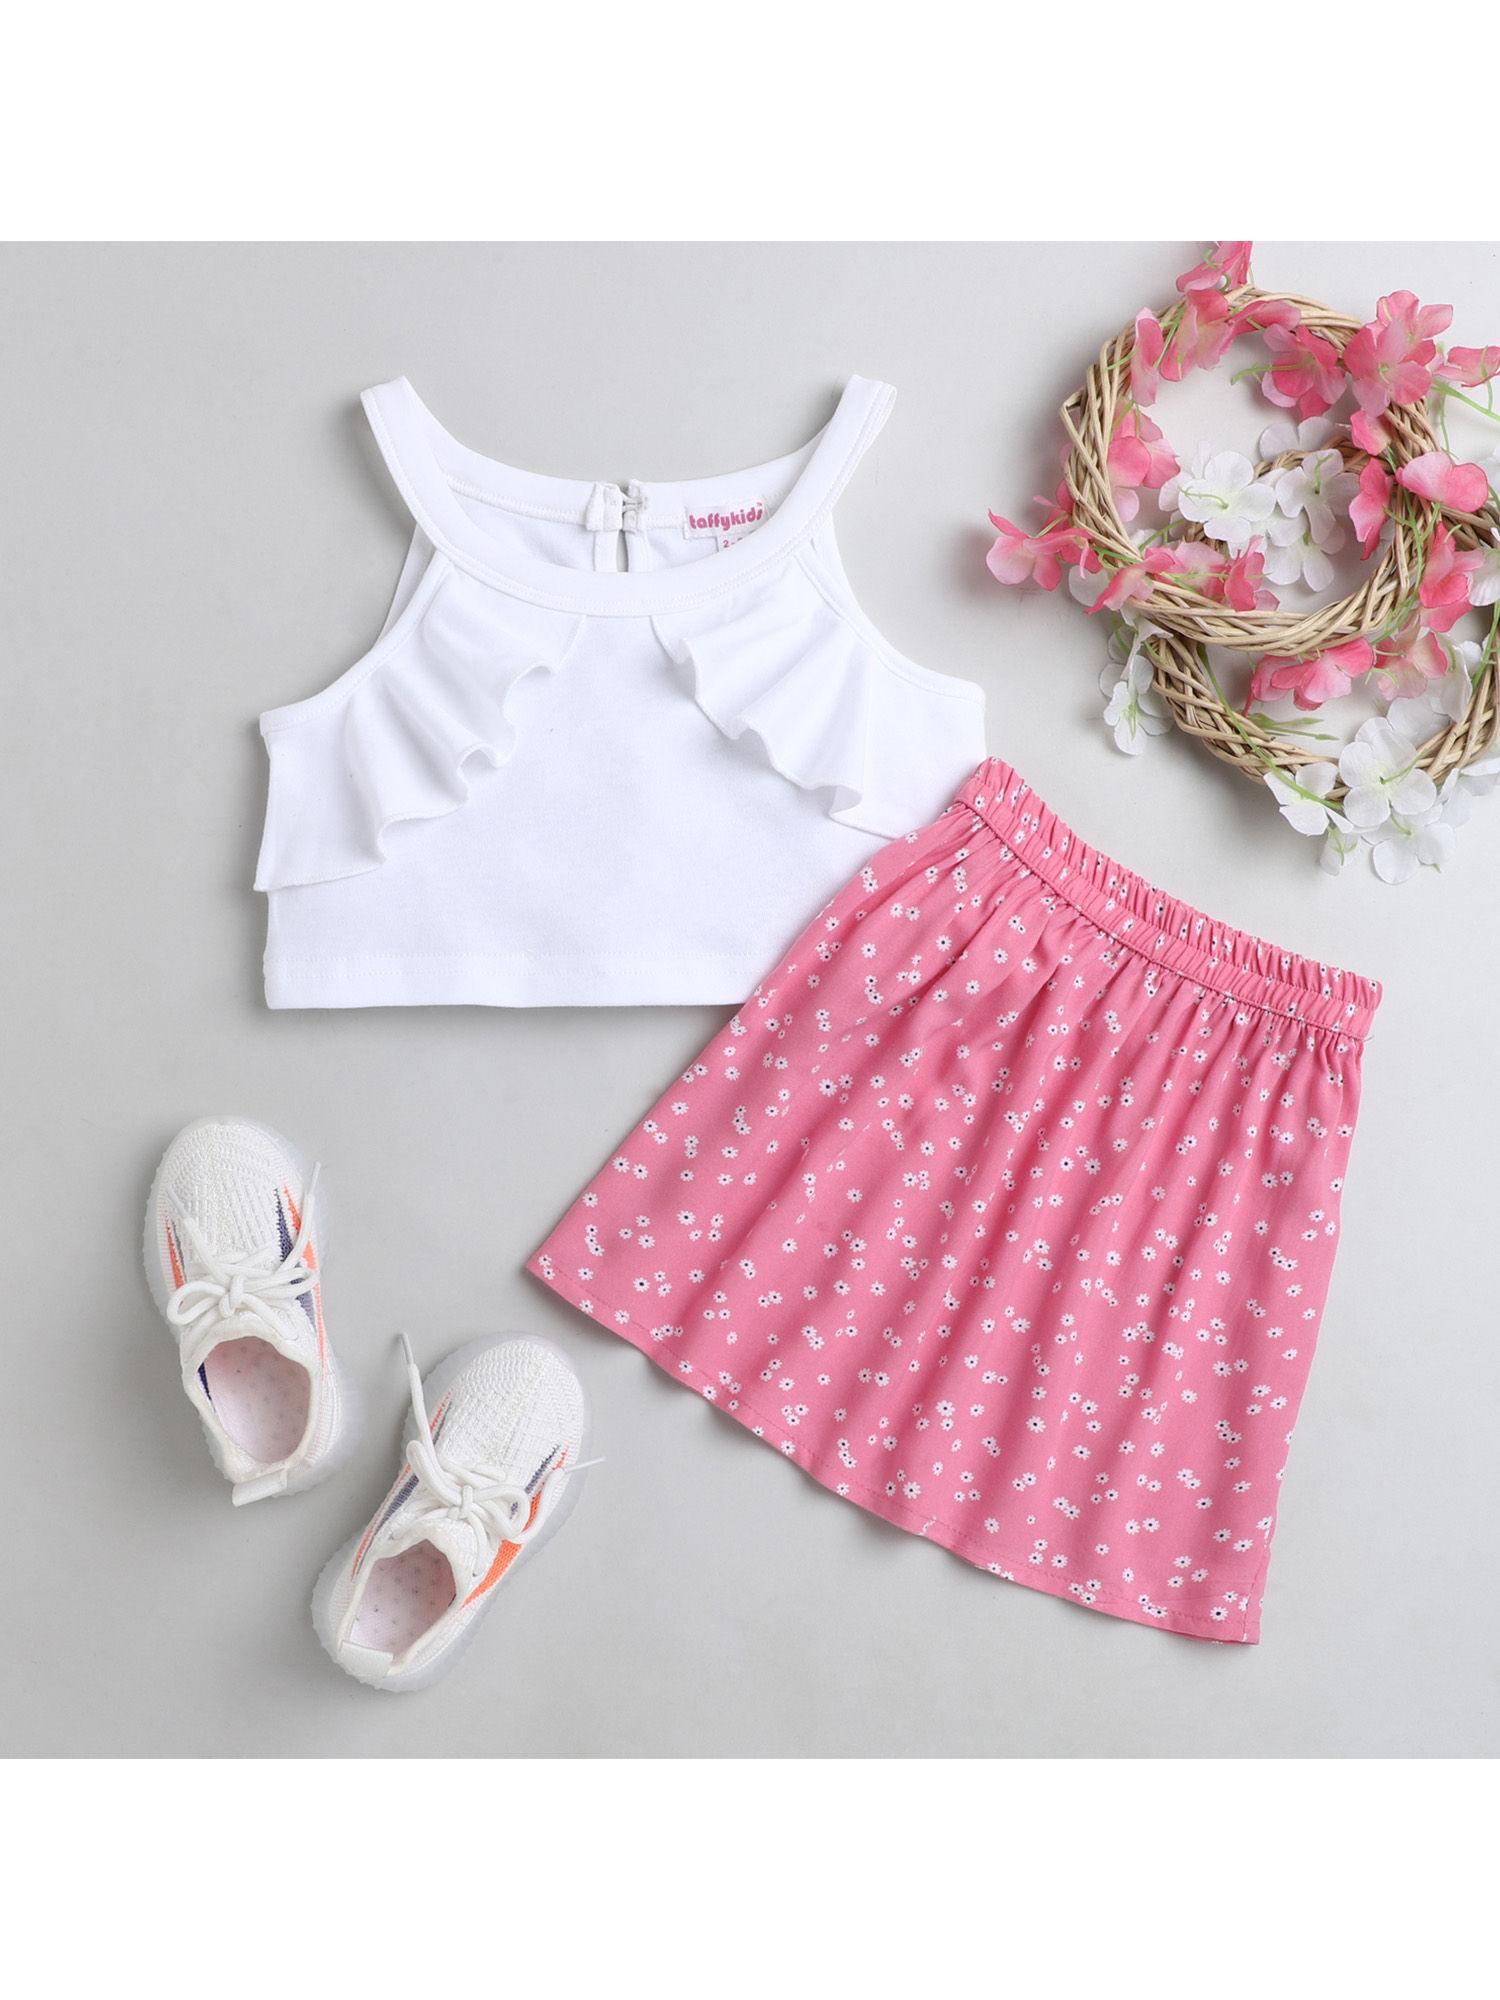 white round neck crop top with pink floral printed skirt (set of 2)